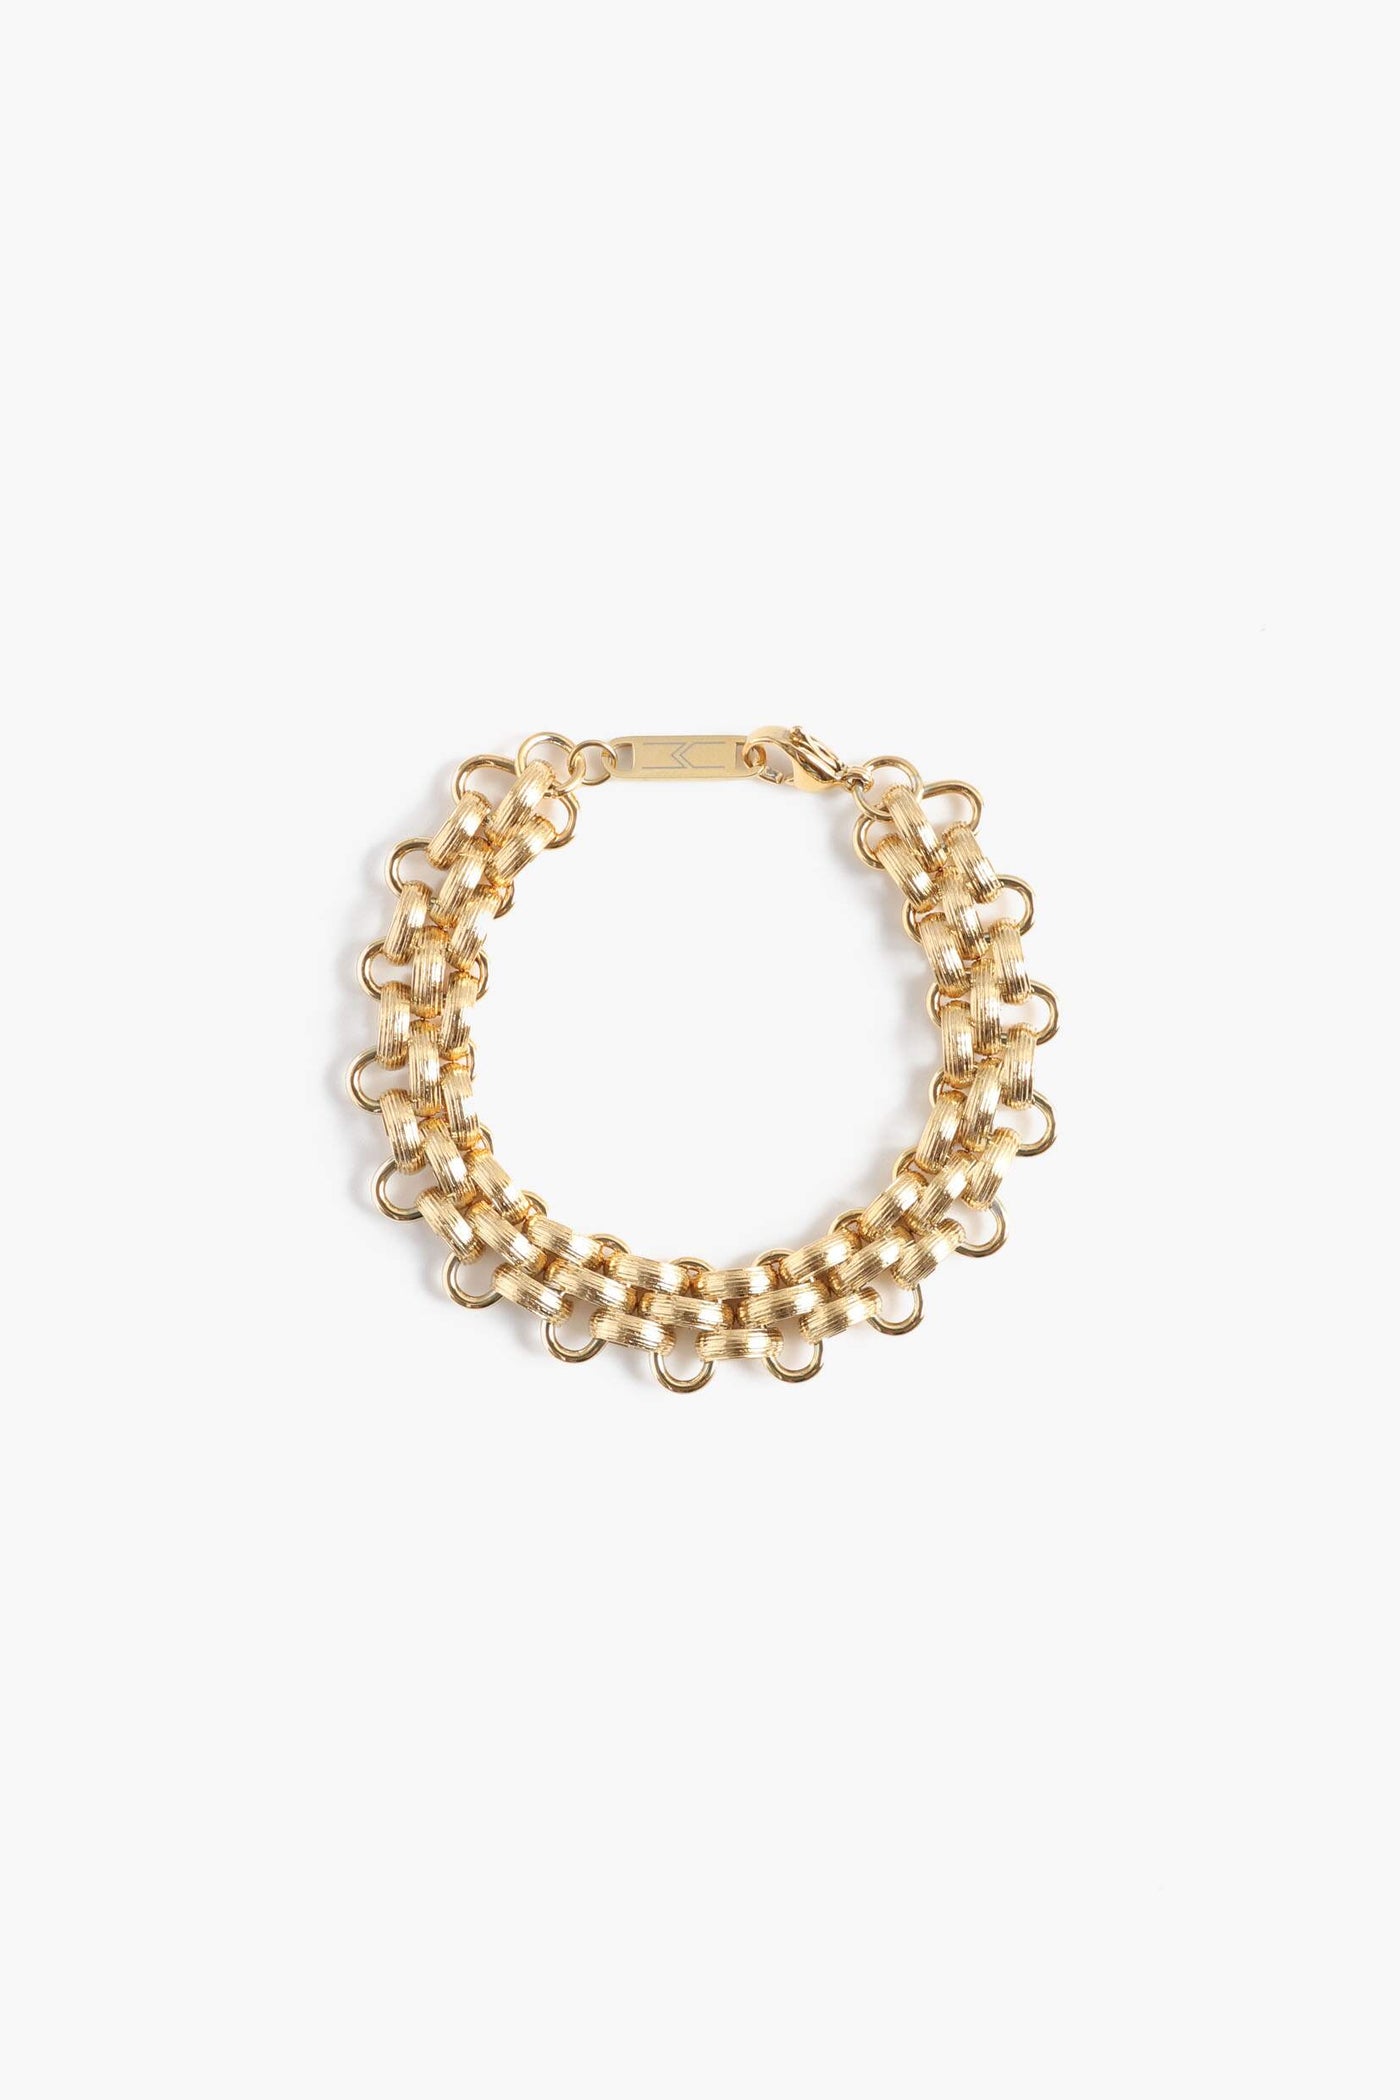 Marrin Costello Jewelry Lattice XL Bracelet woven chain bracelet with lobster clasp closure. Waterproof, sustainable, hypoallergenic. 14k gold plated stainless steel.